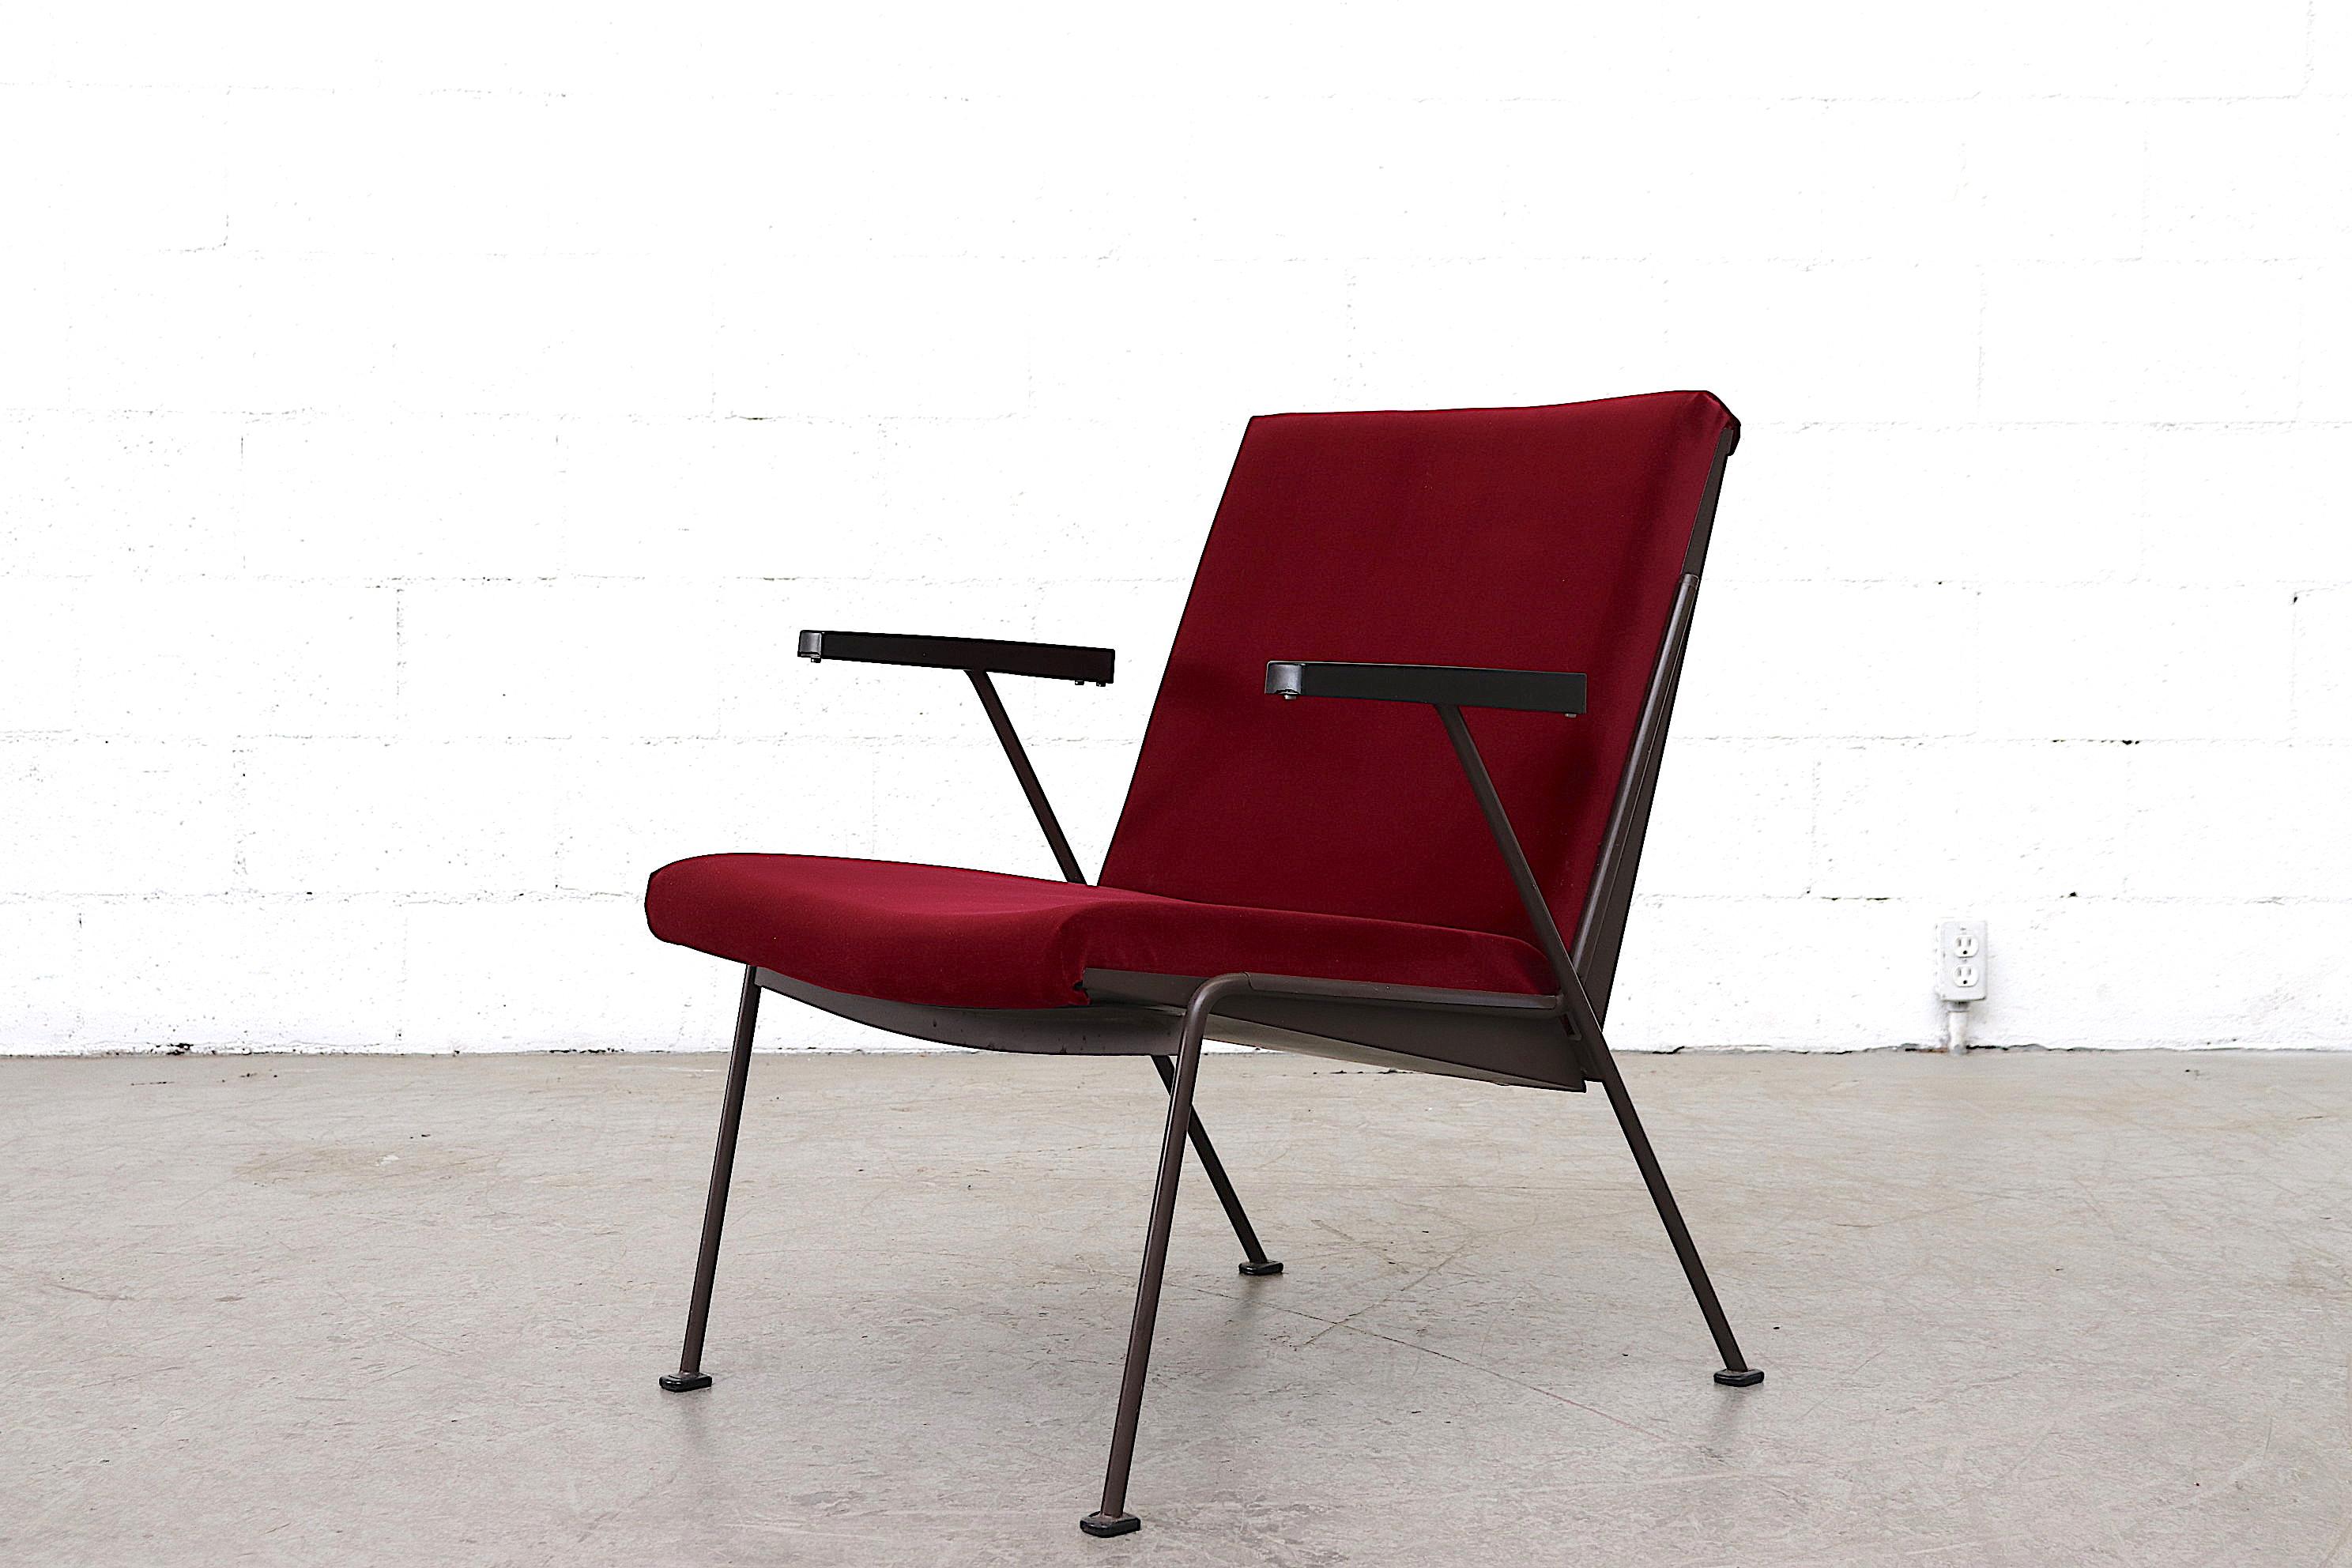 Wim Rietveld newly upholstered garnet velvet lounge chair for Ahrend de Cirkel with original chocolate brown enameled metal frame and bakelite armrests. Frame in original condition with some wear.